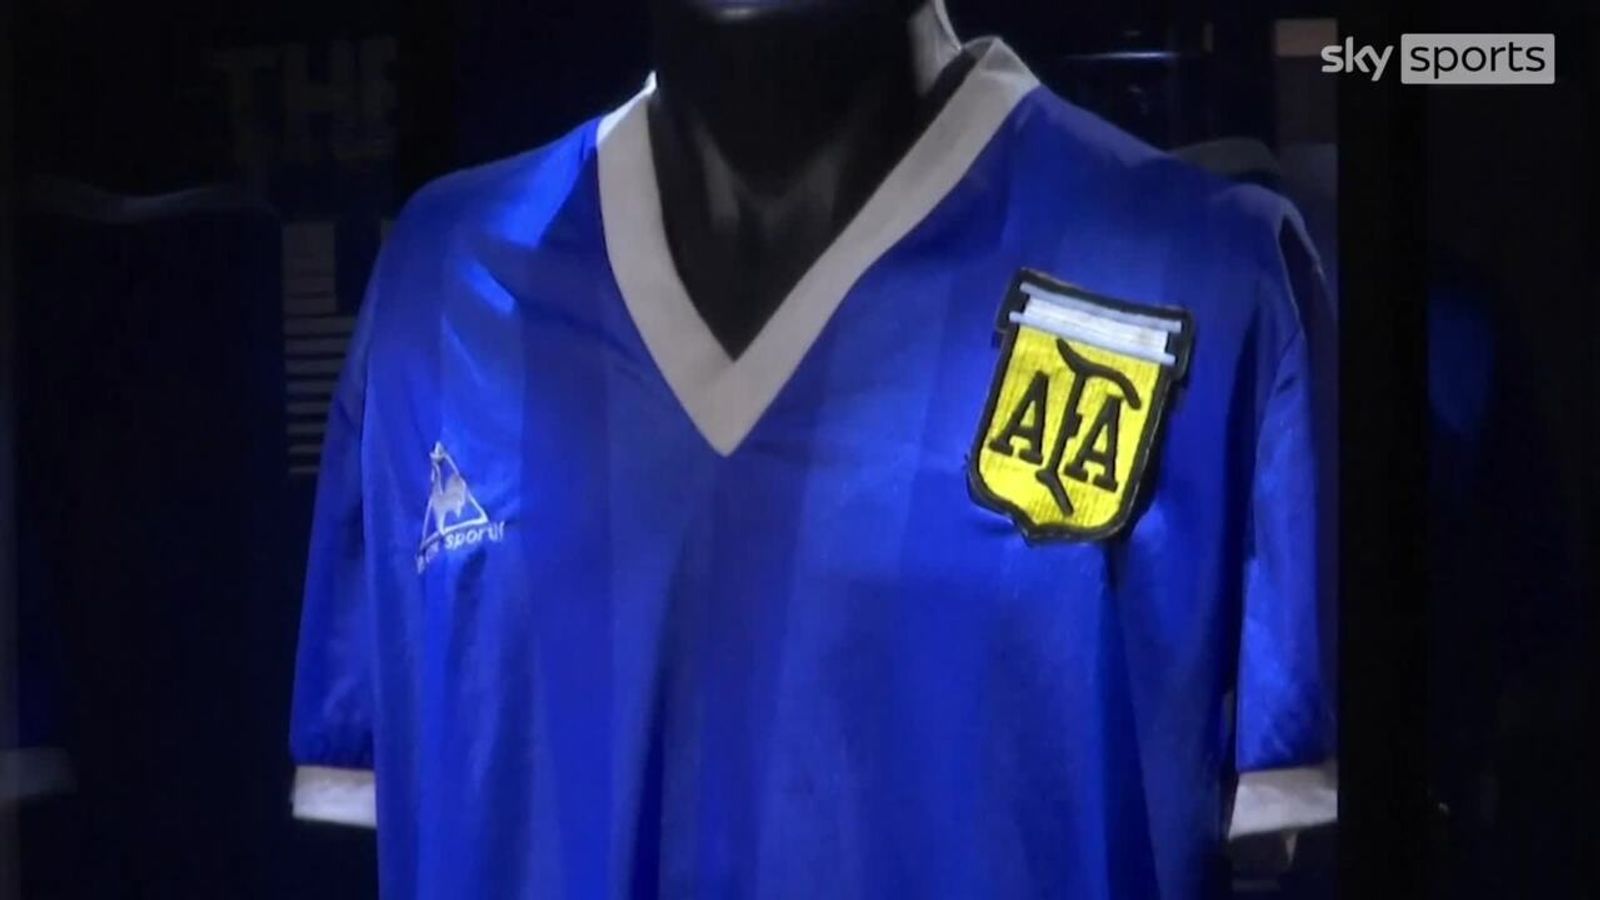 Diego Maradona's 'Hand of God' shirt sold for more than 7m at auction ...